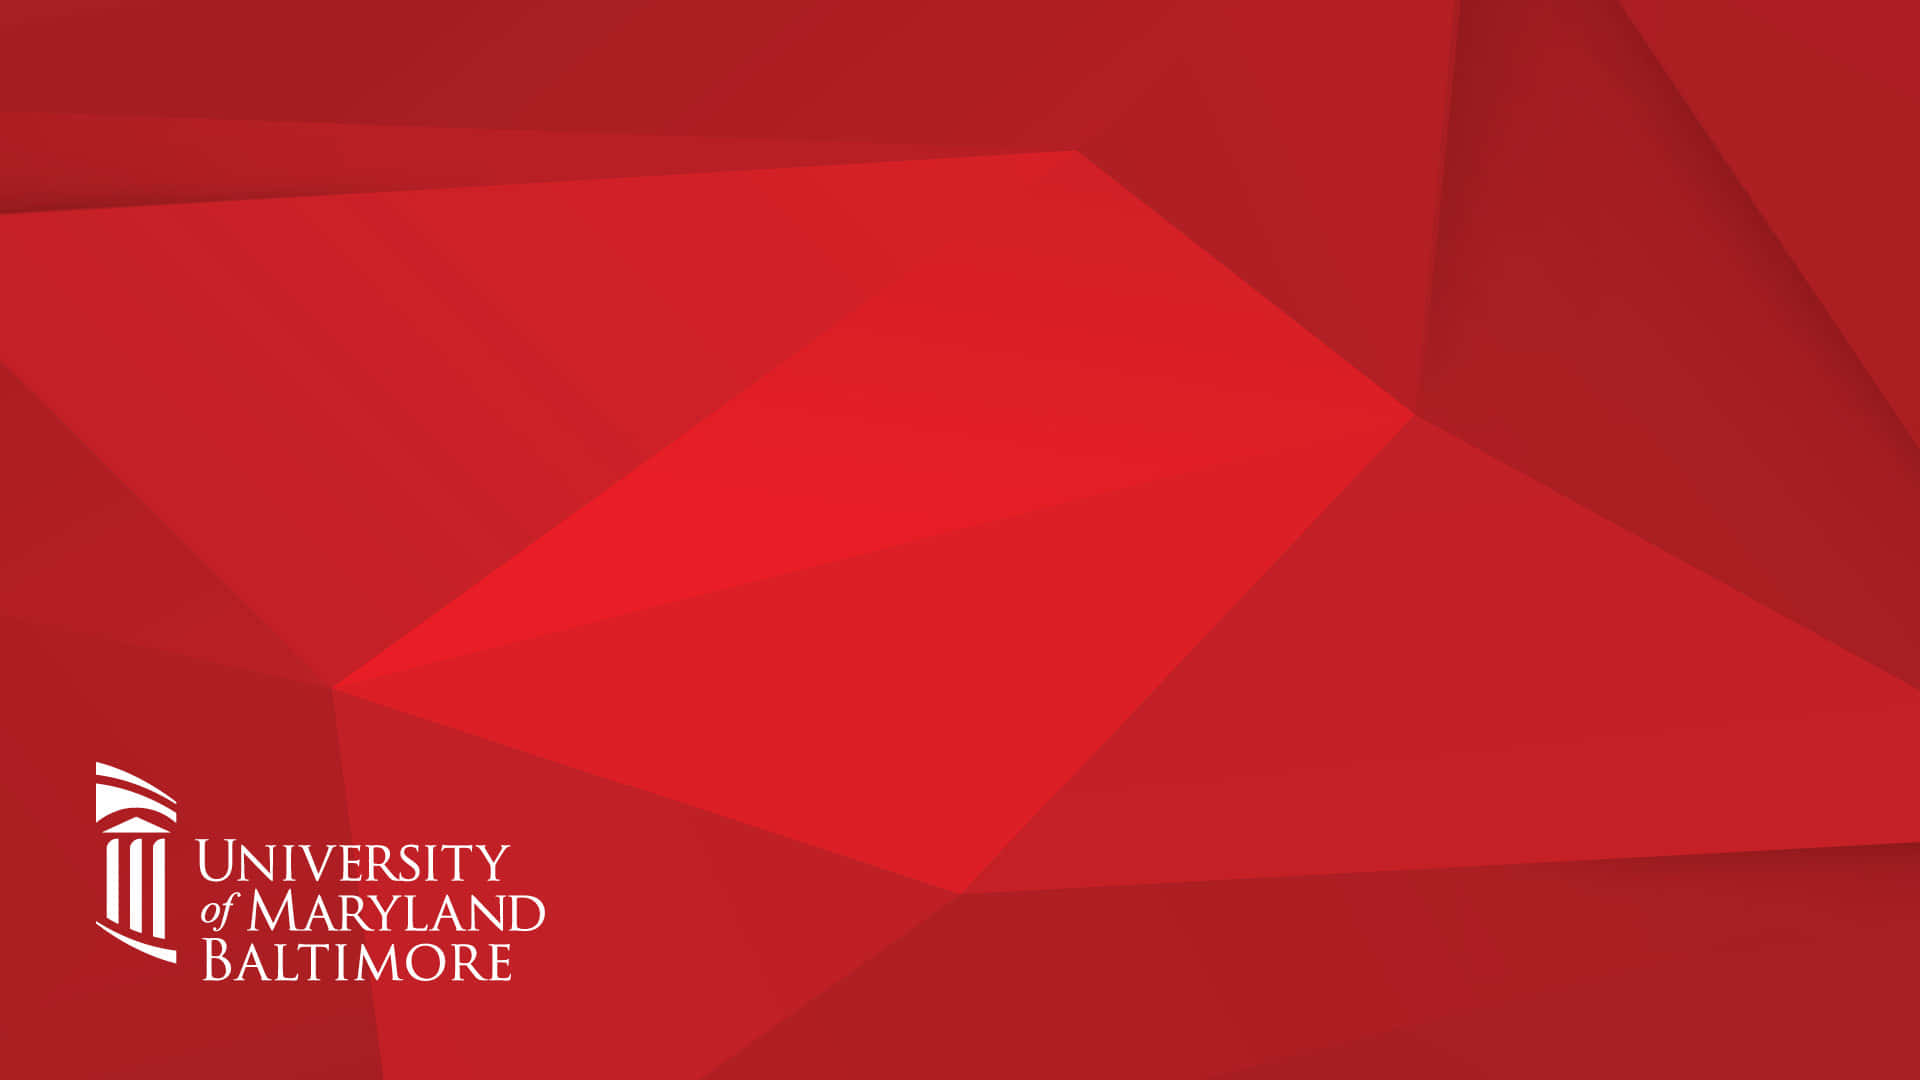 University Of Baltimore - Red Background